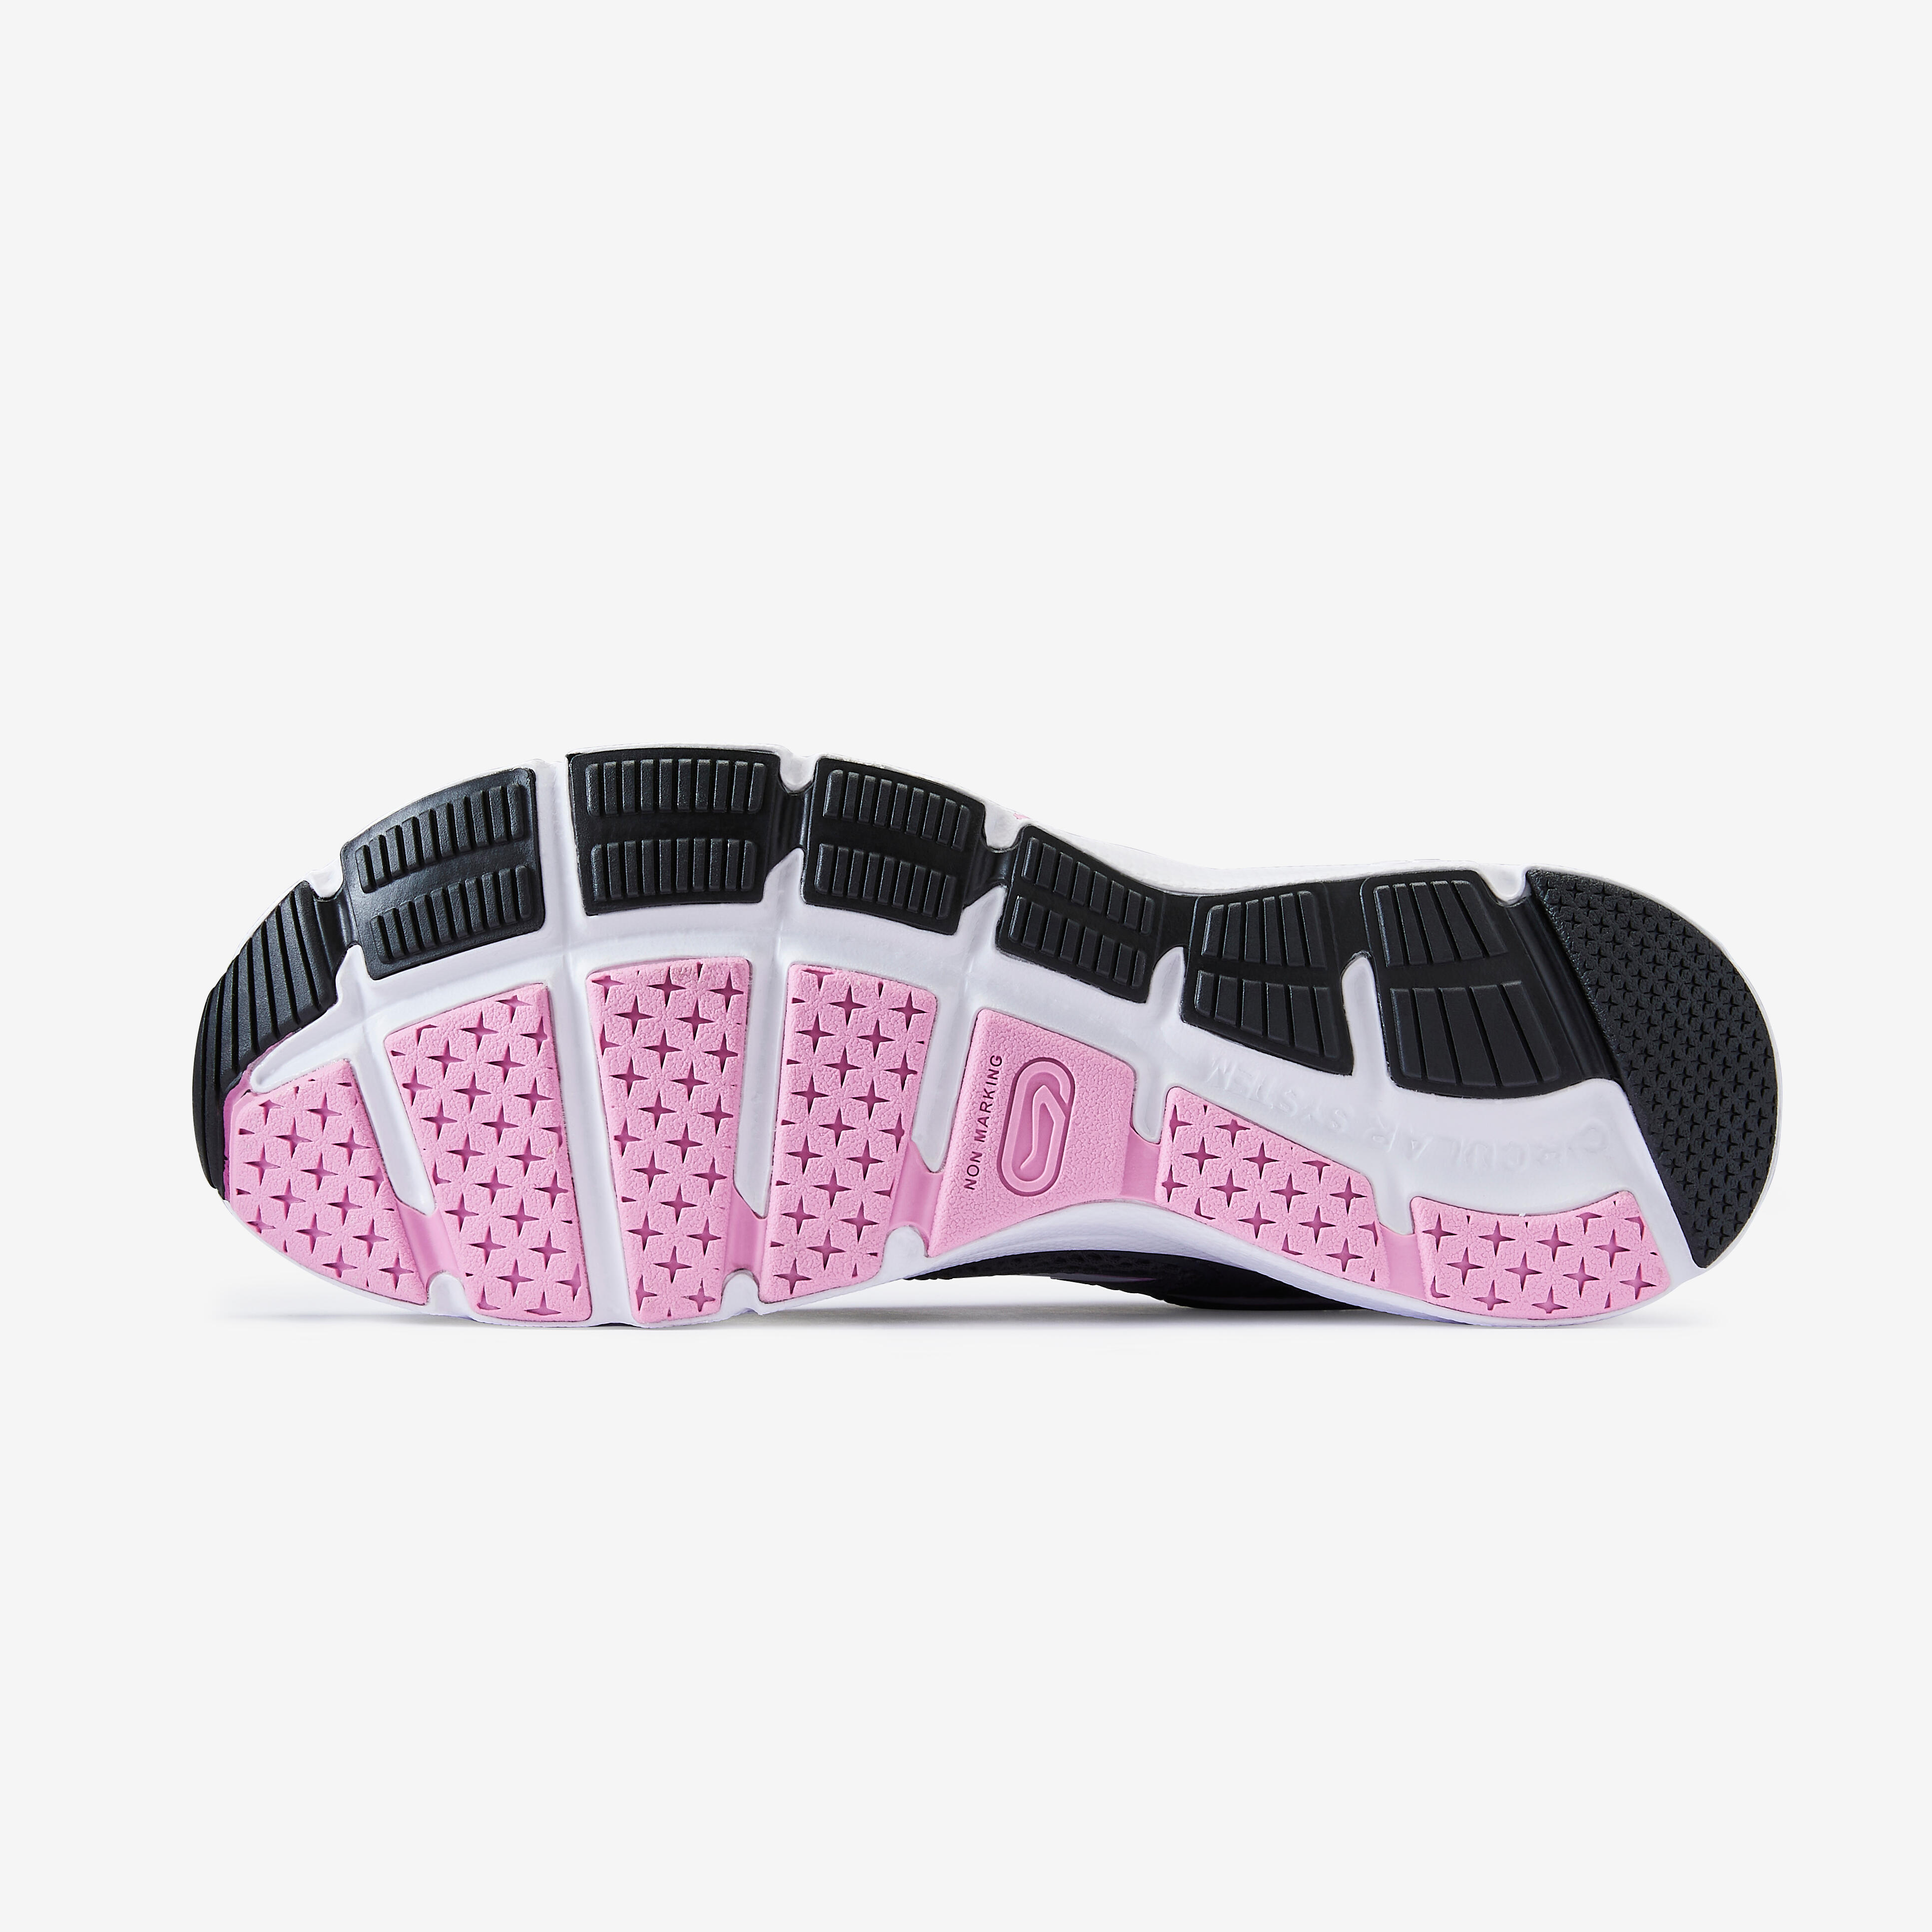 Black And Pink Nike Sneakers